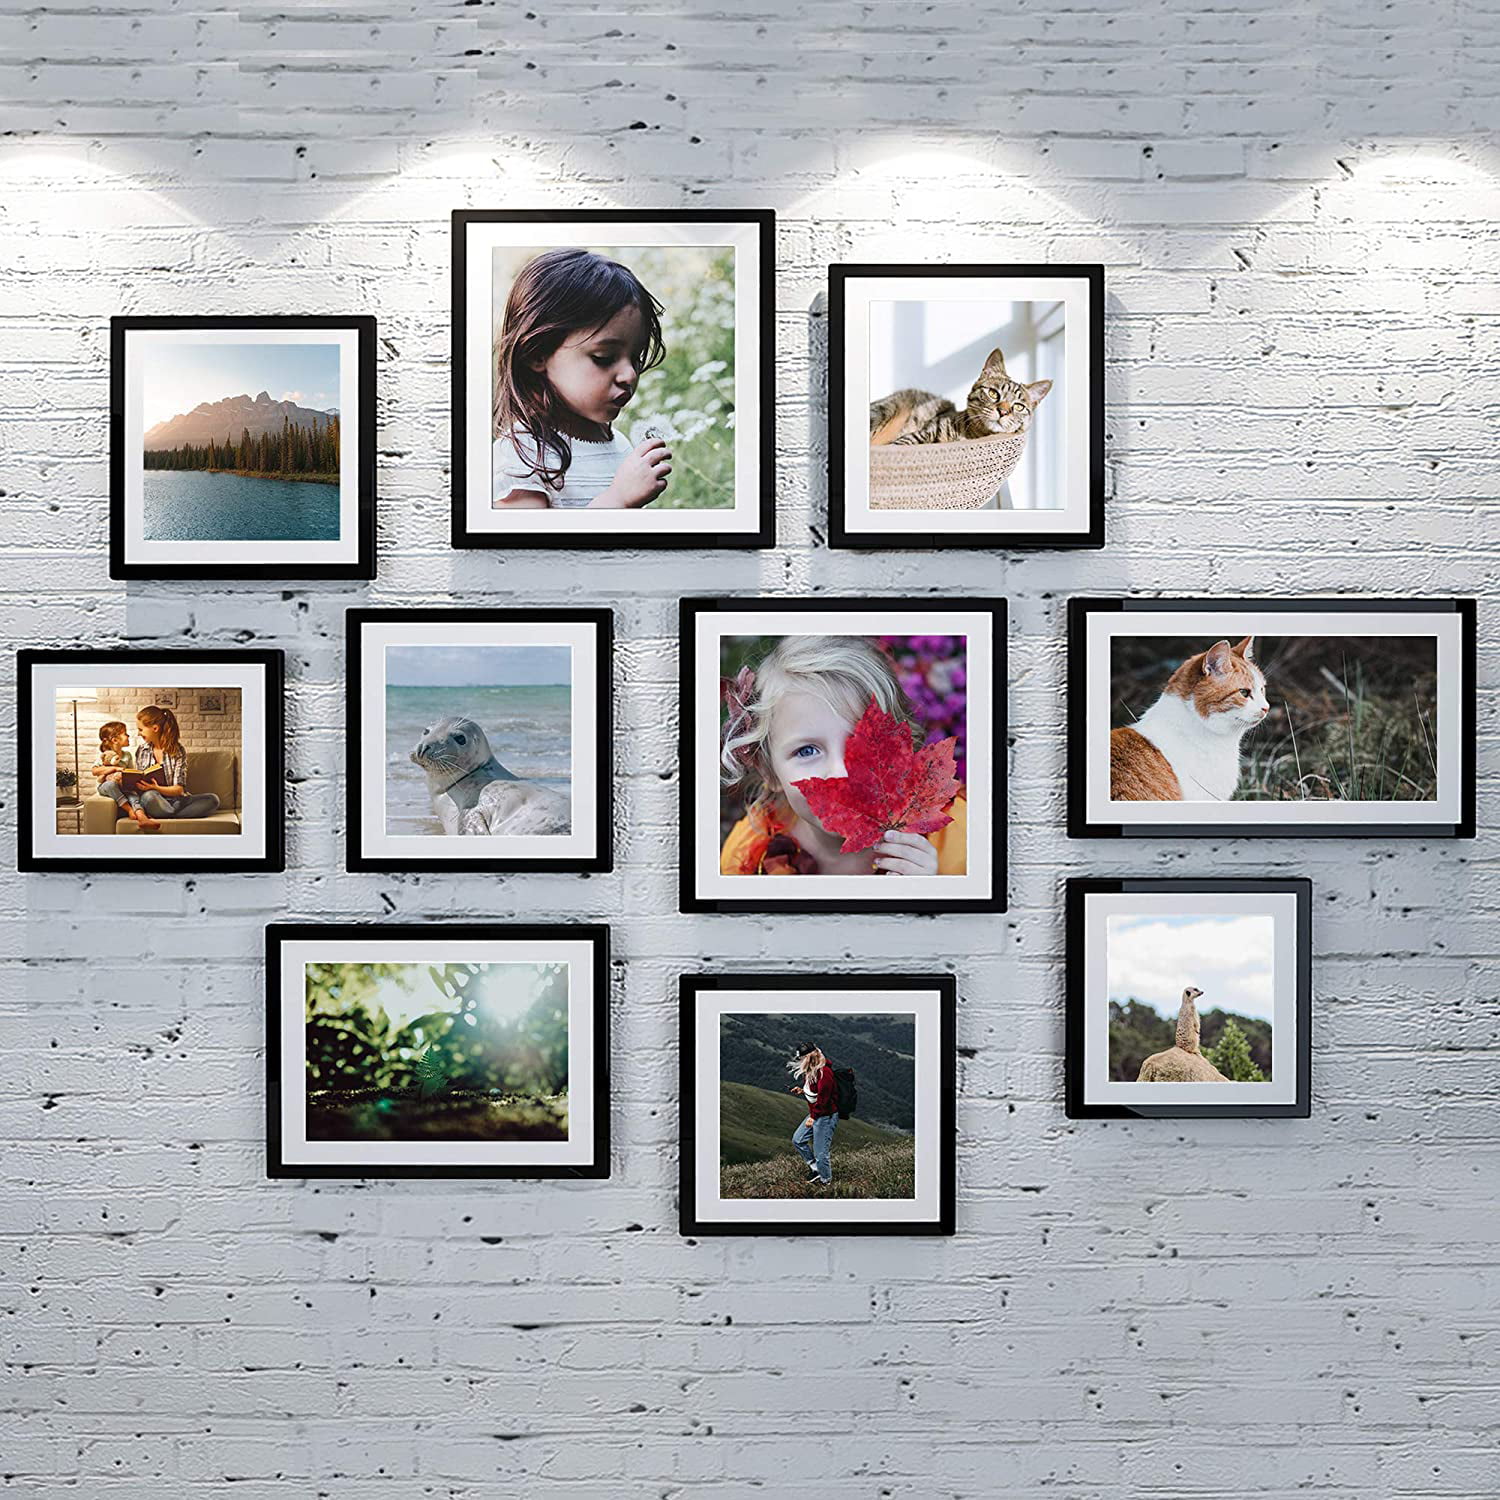 upsimples 5x7 Picture Frame Set of 10,Multi Photo Frames Collage for Wall or Tabletop Display,Black